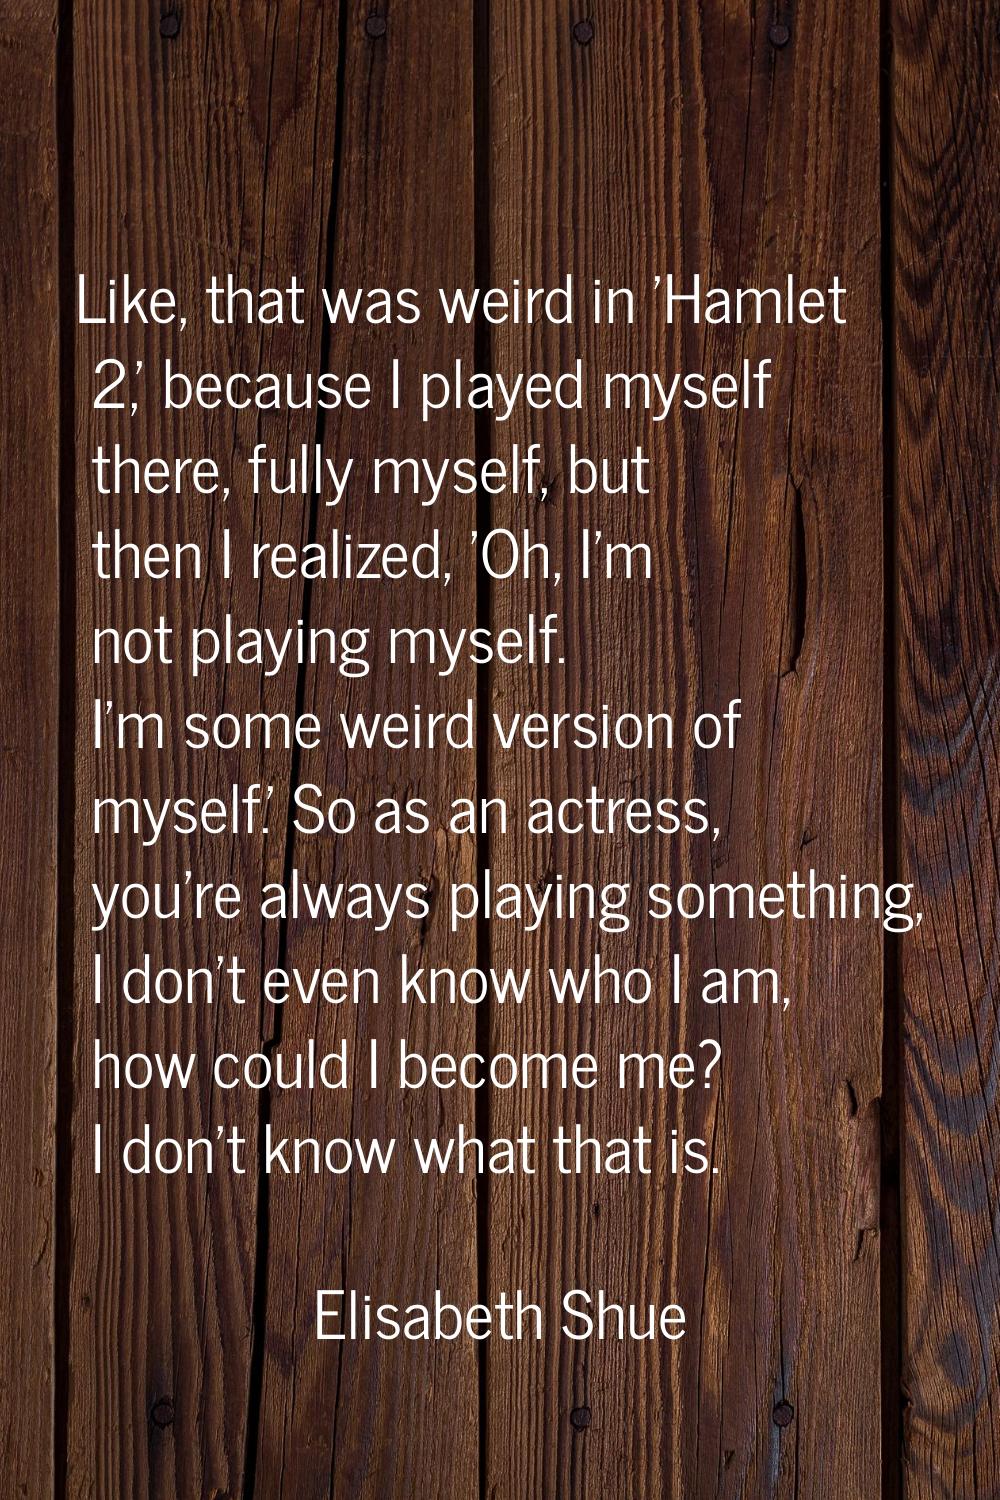 Like, that was weird in 'Hamlet 2,' because I played myself there, fully myself, but then I realize